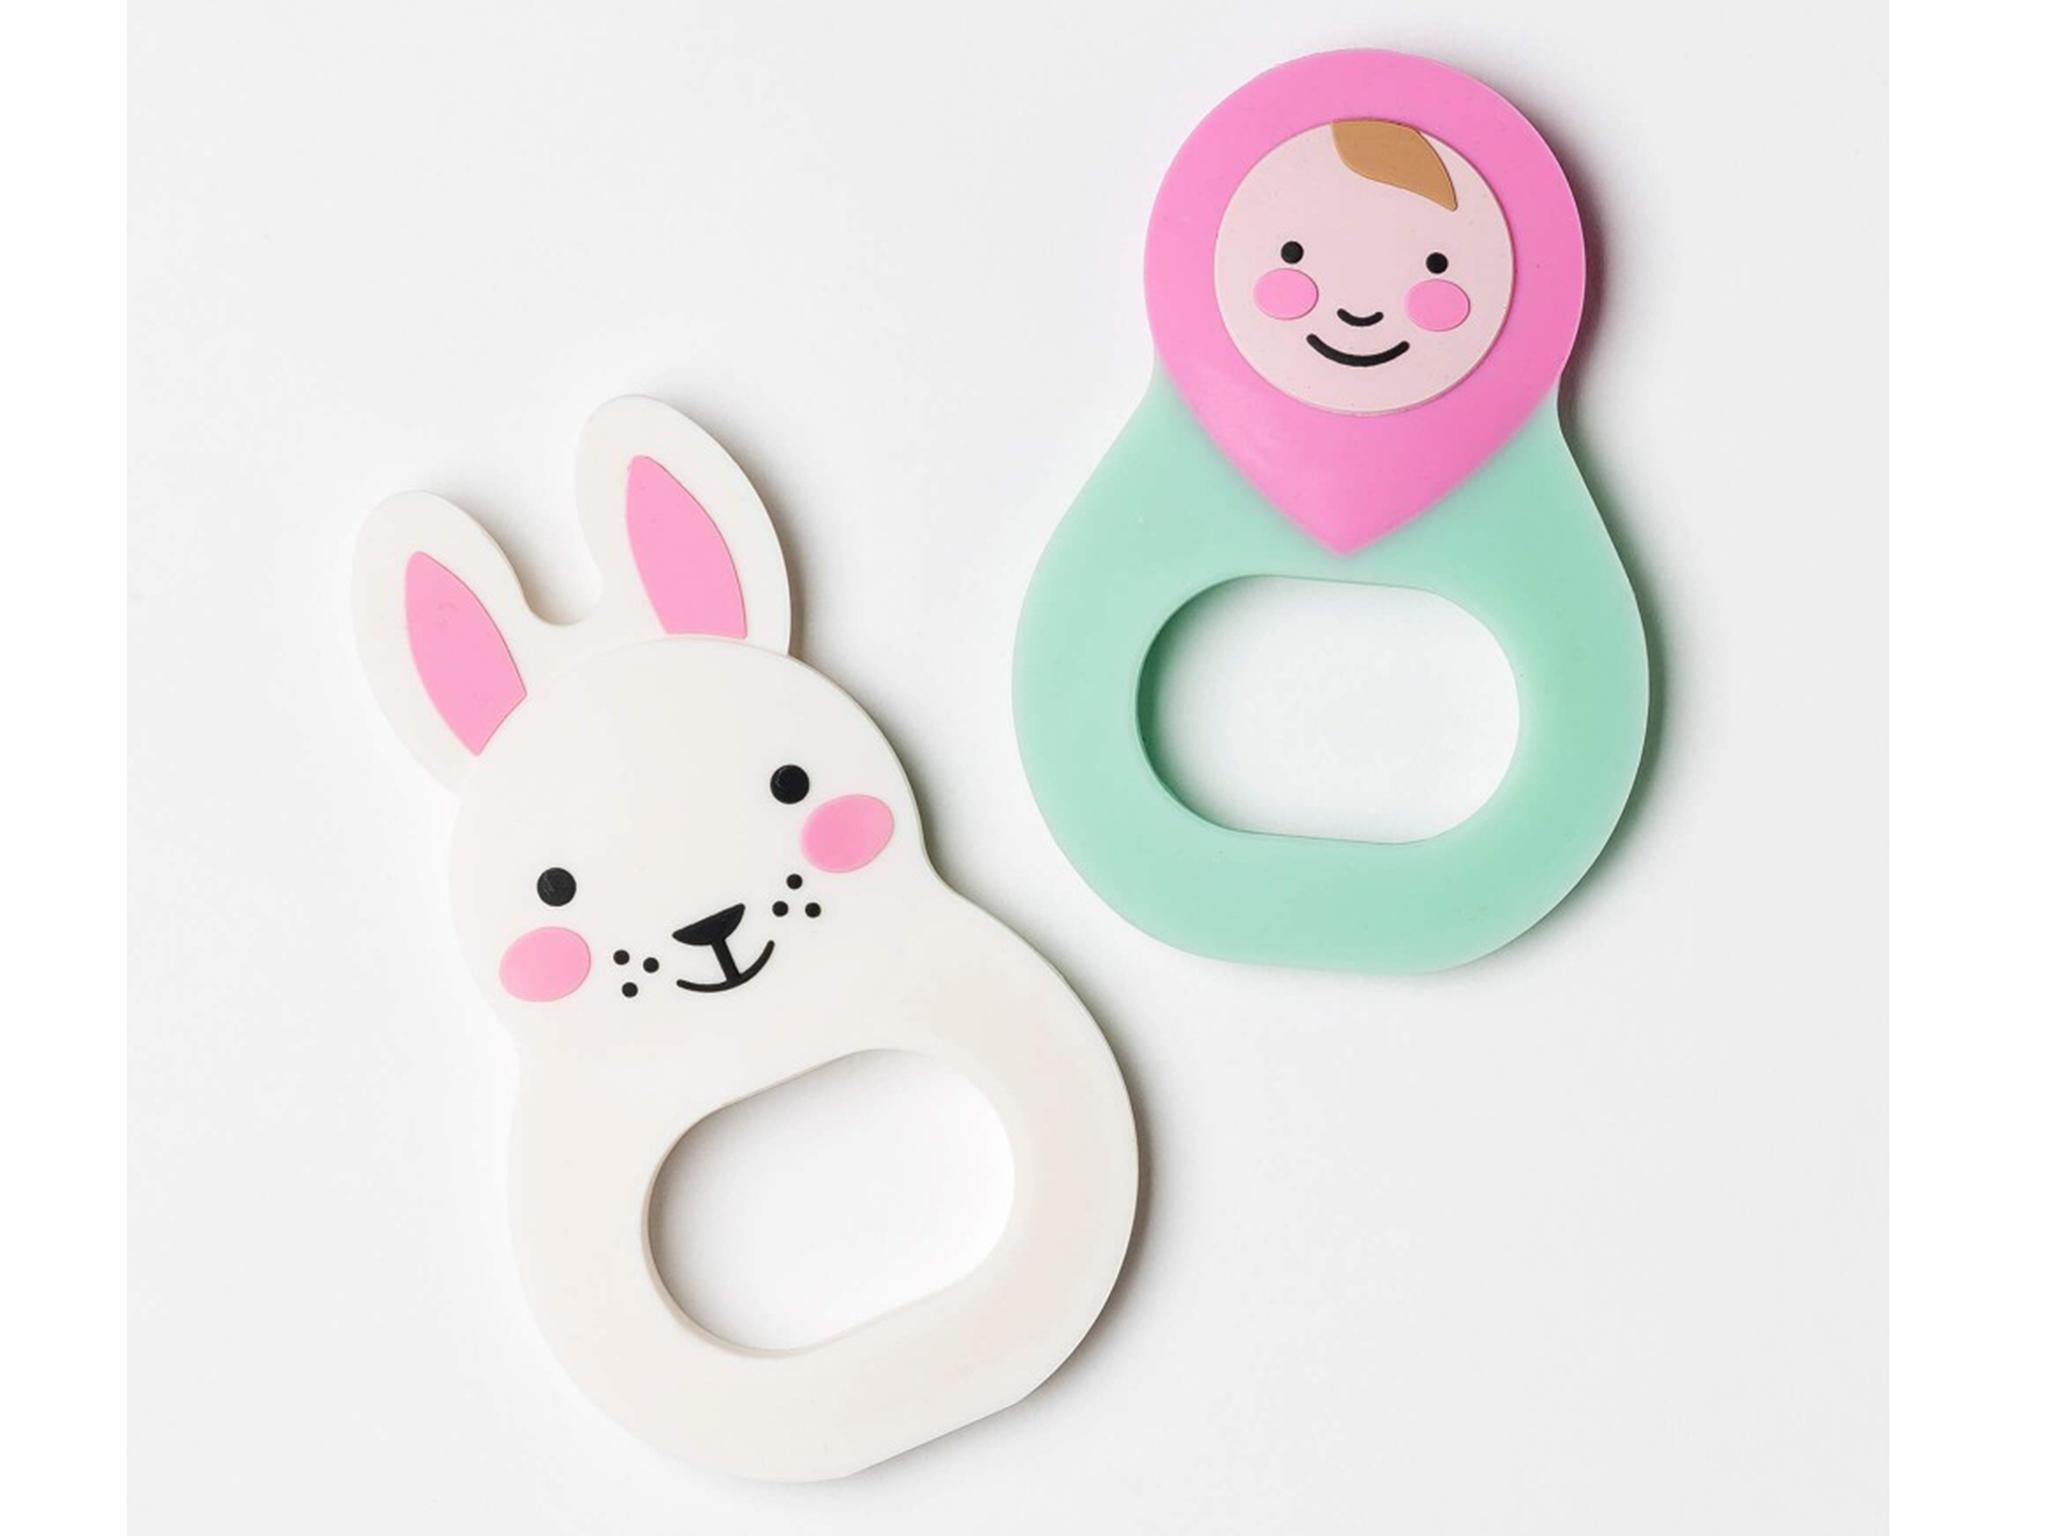 soft chew toys for babies